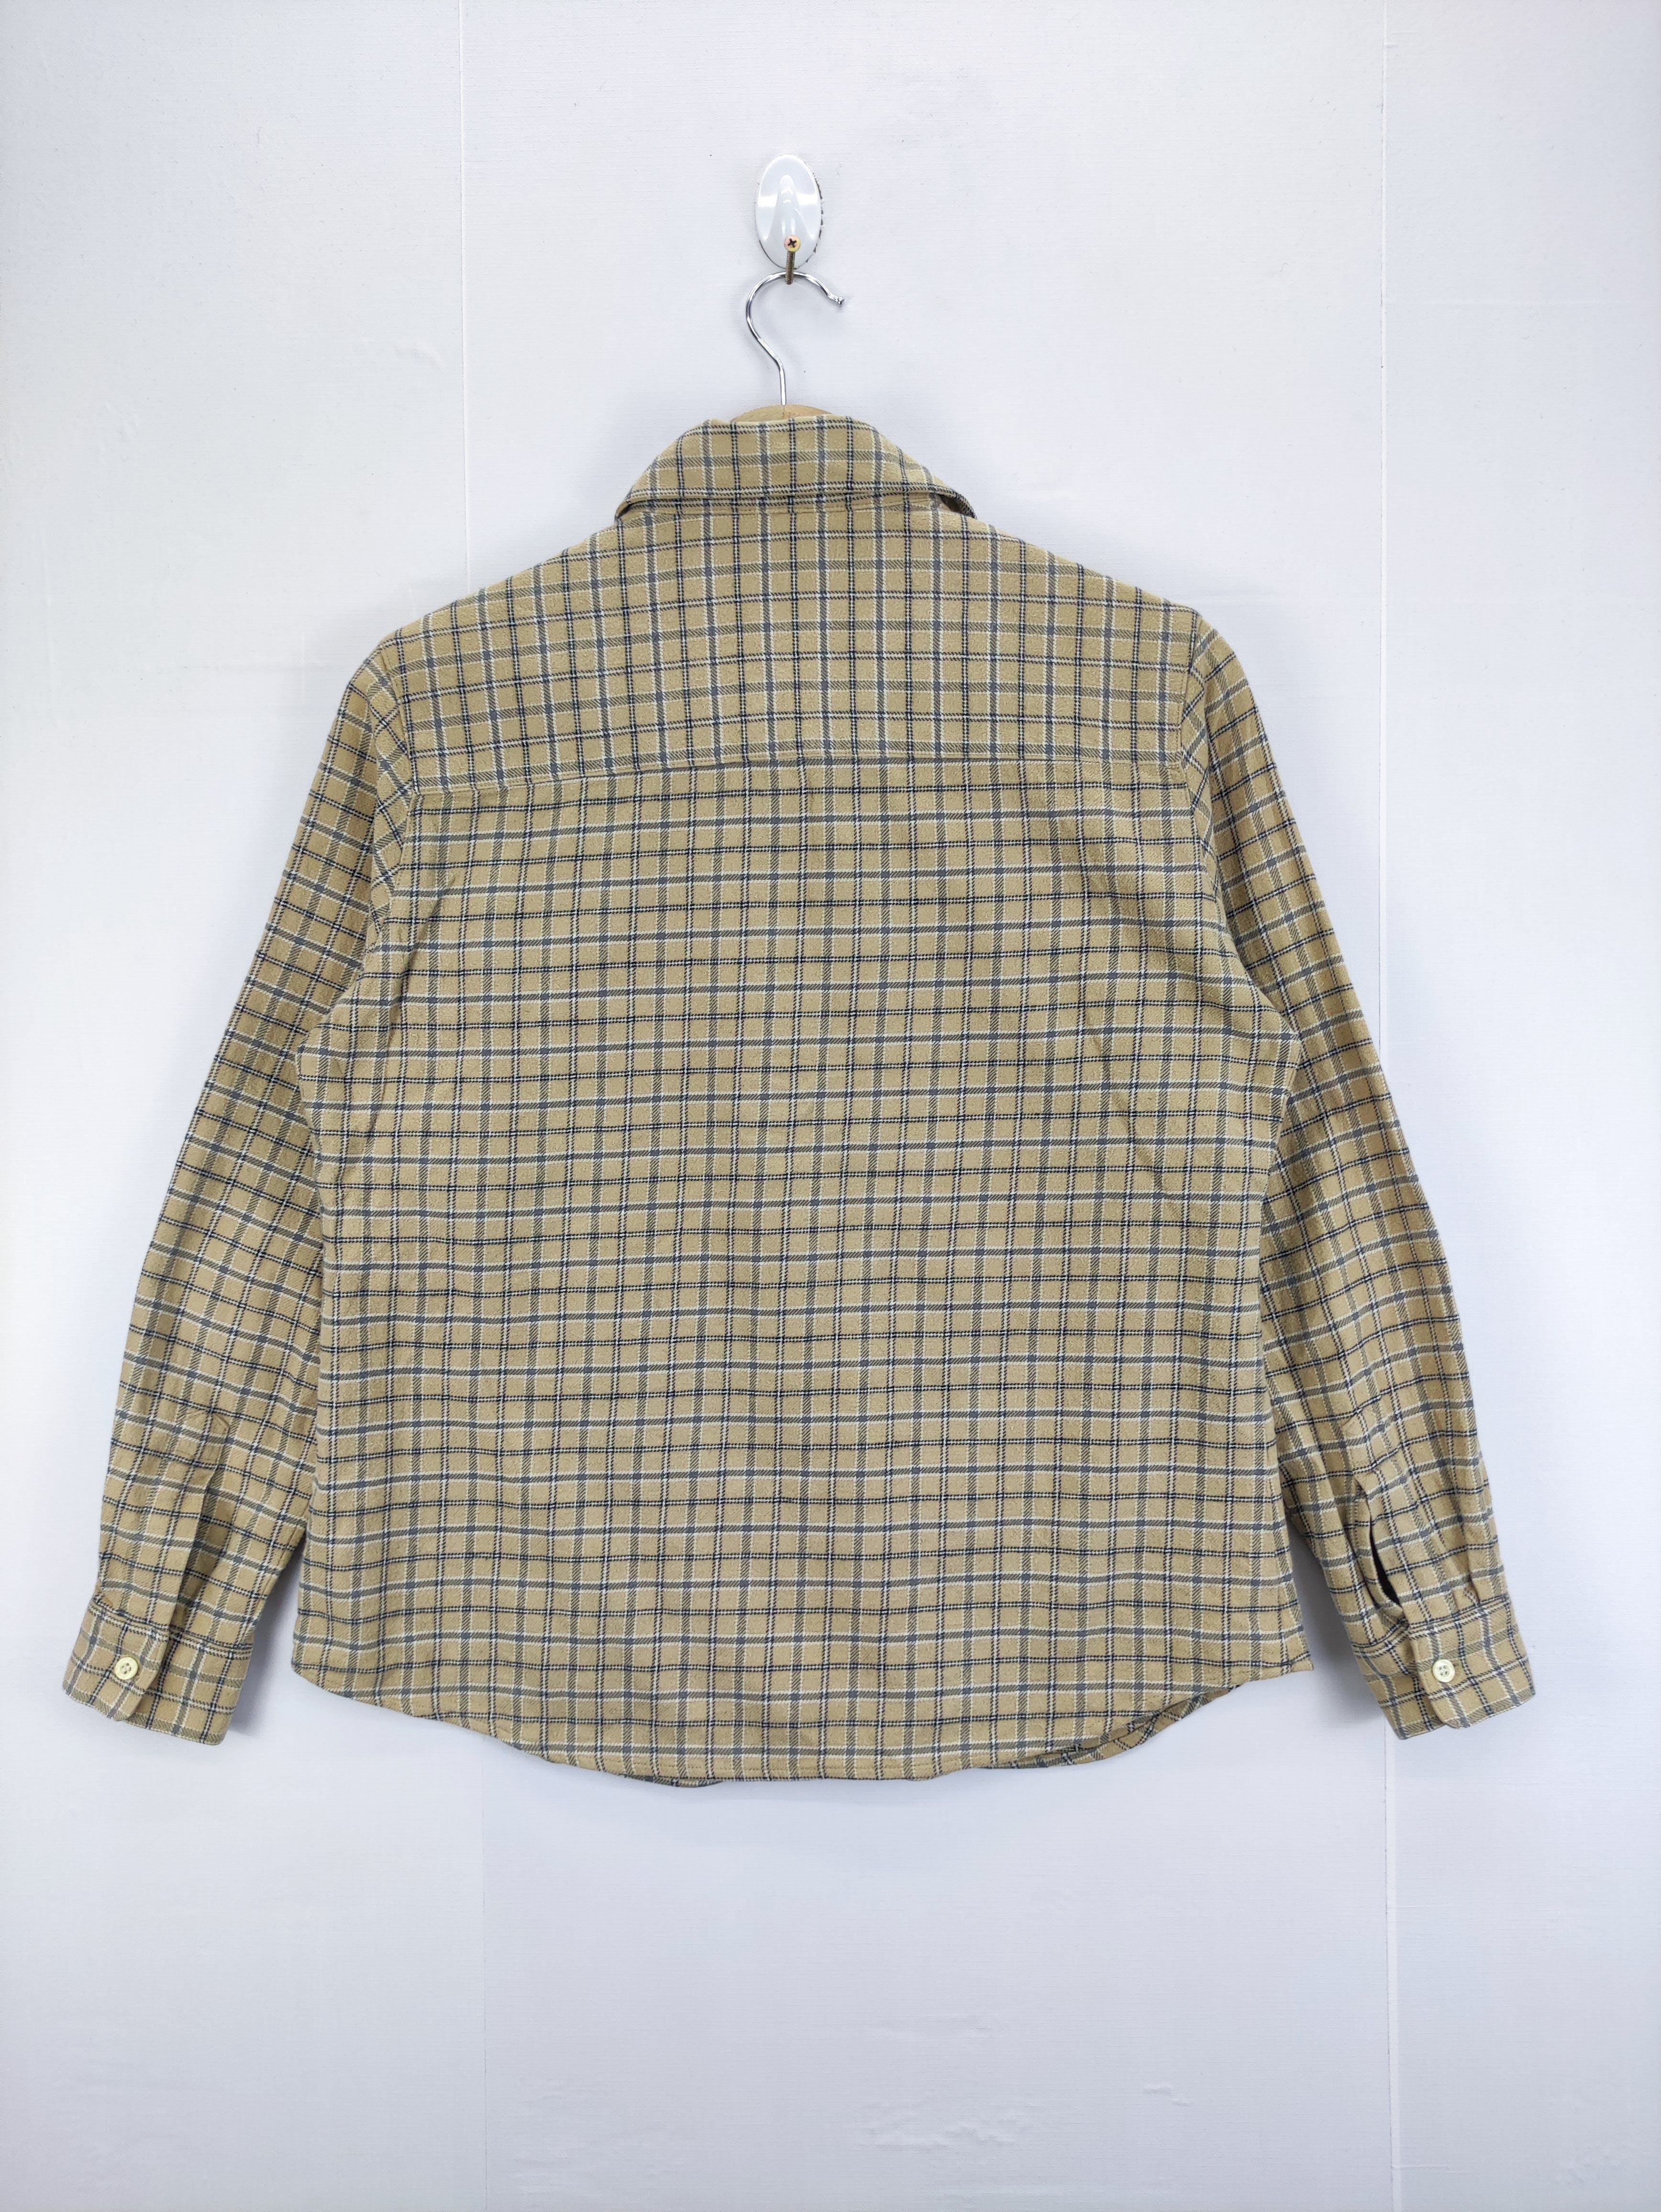 Vintage Lacoste Sports Checkered Shirt Button Up - 7